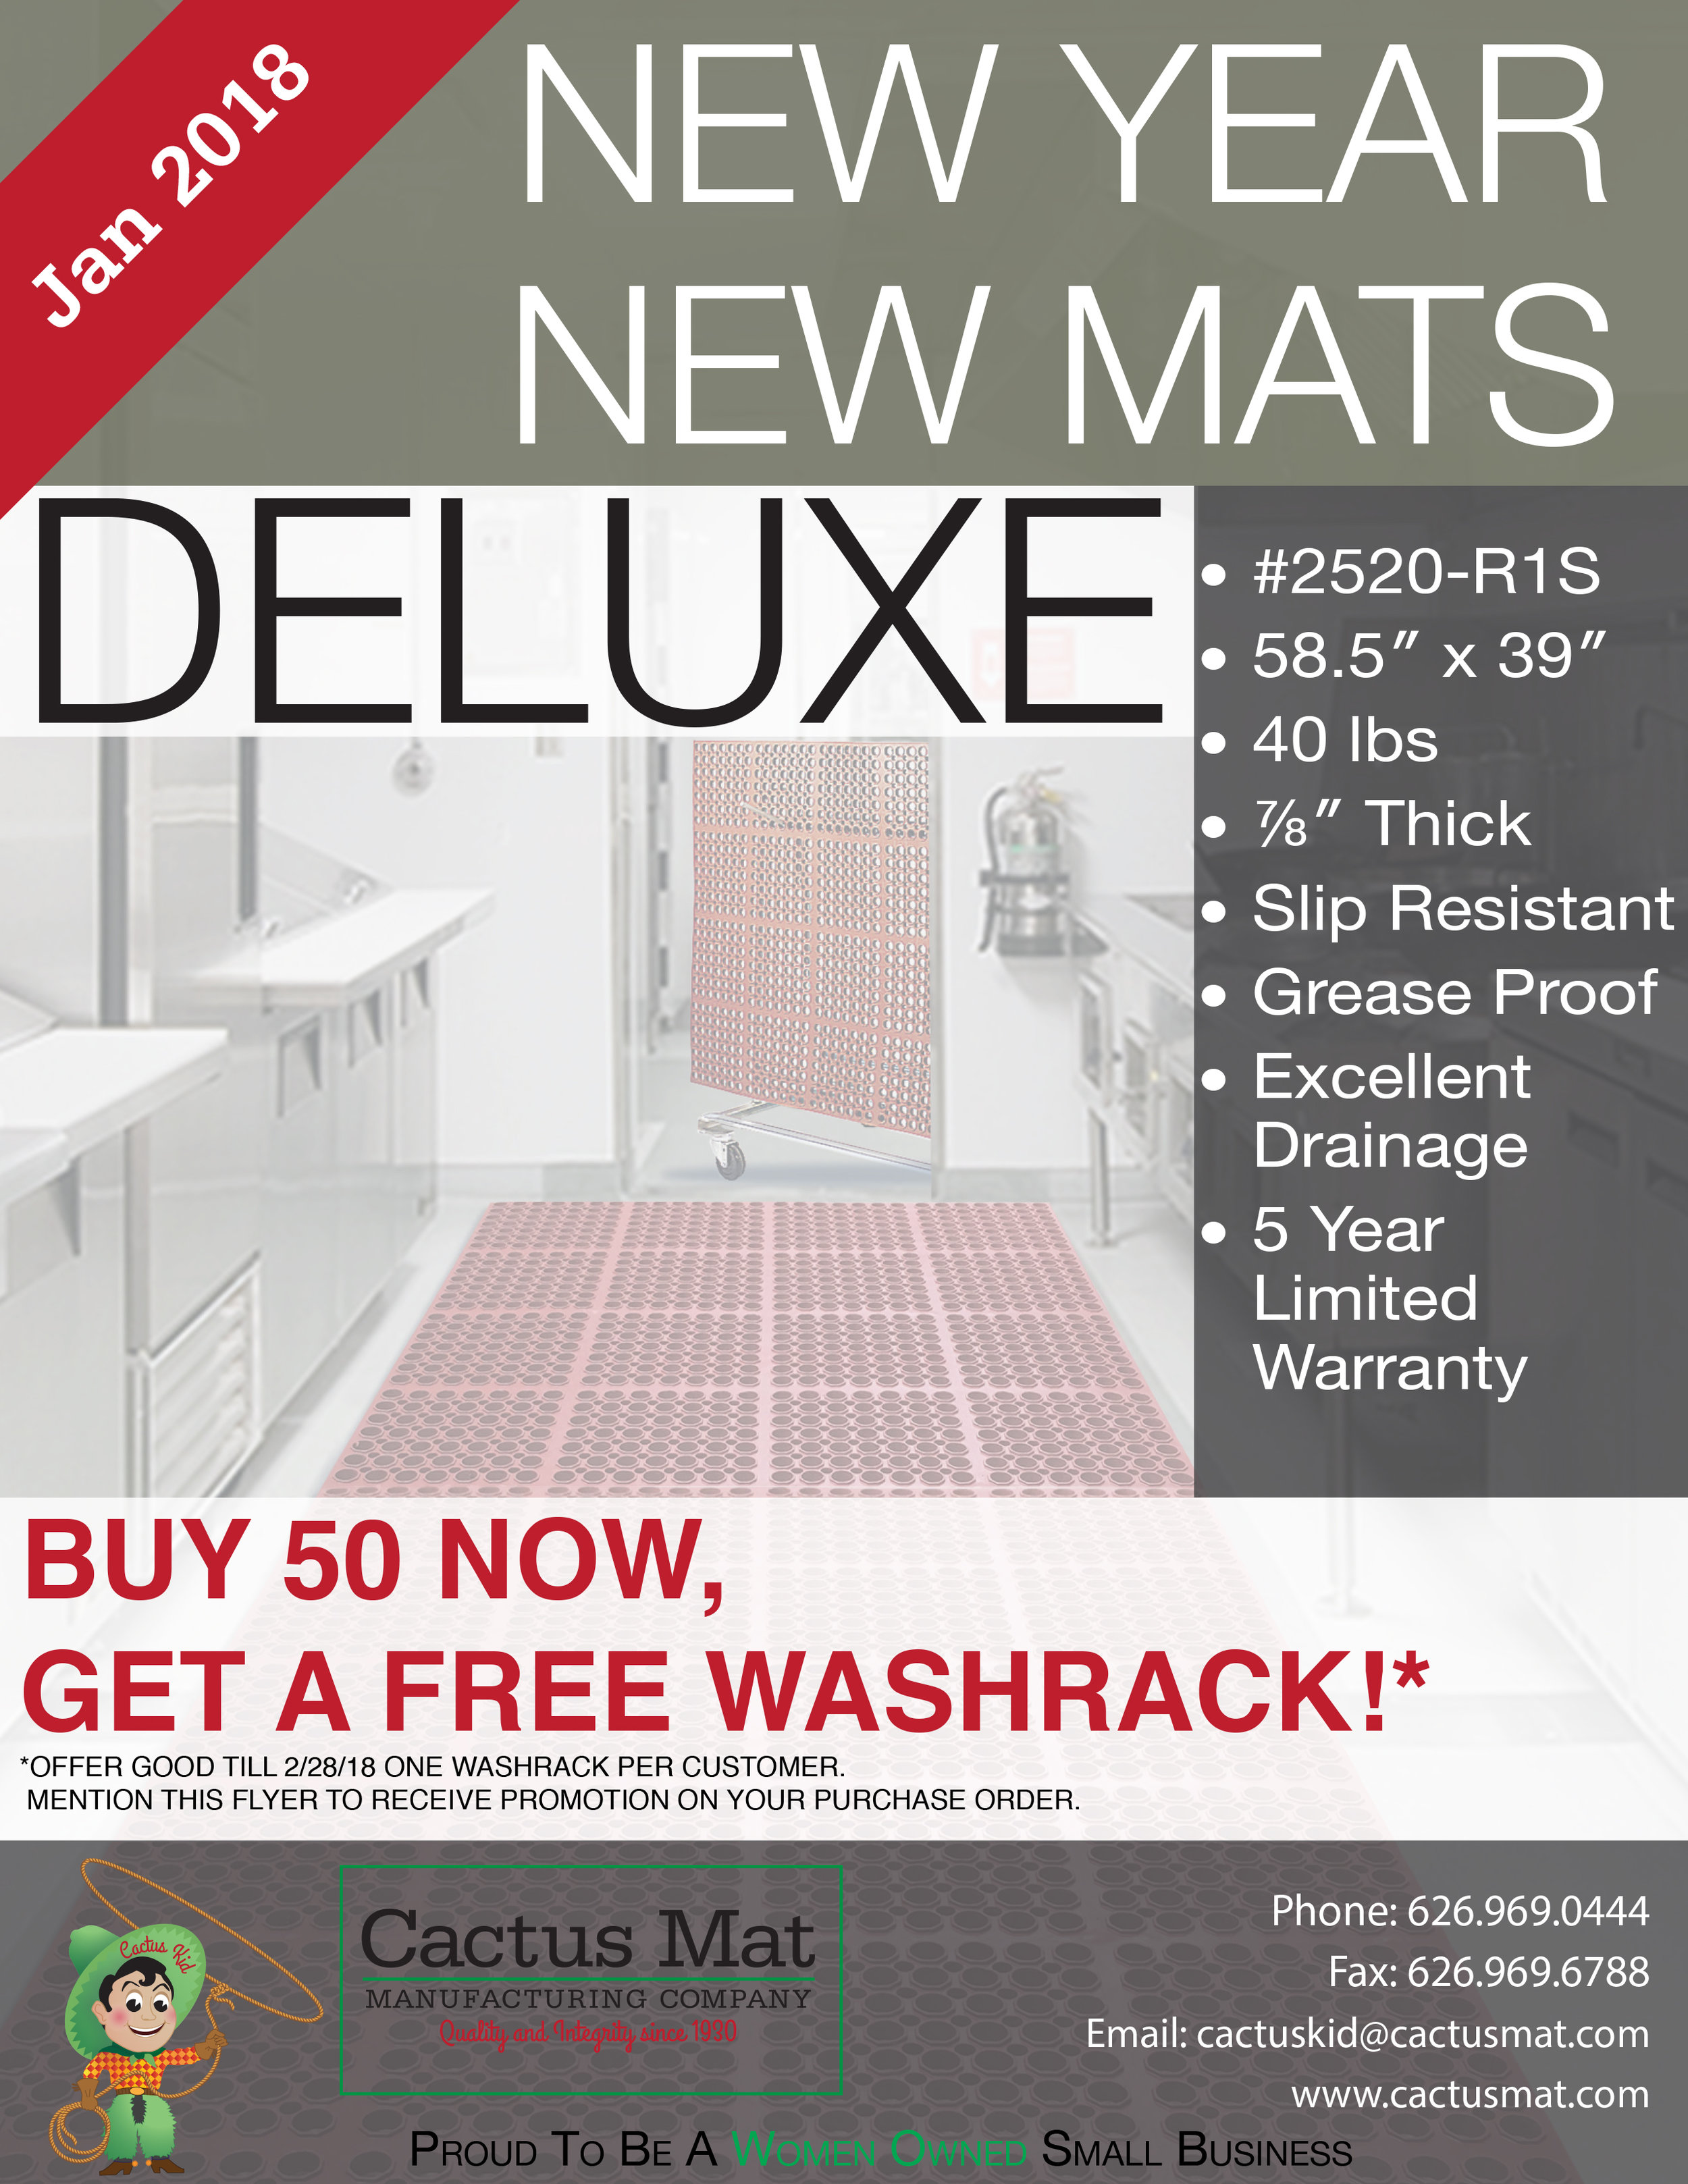 Cactus Mat 2520-R1S VIP Deluxe 58 1/2 x 39 Red Grease-Resistant, Anti- Fatigue, Anti-Slip Floor Mat - 7/8 Thick